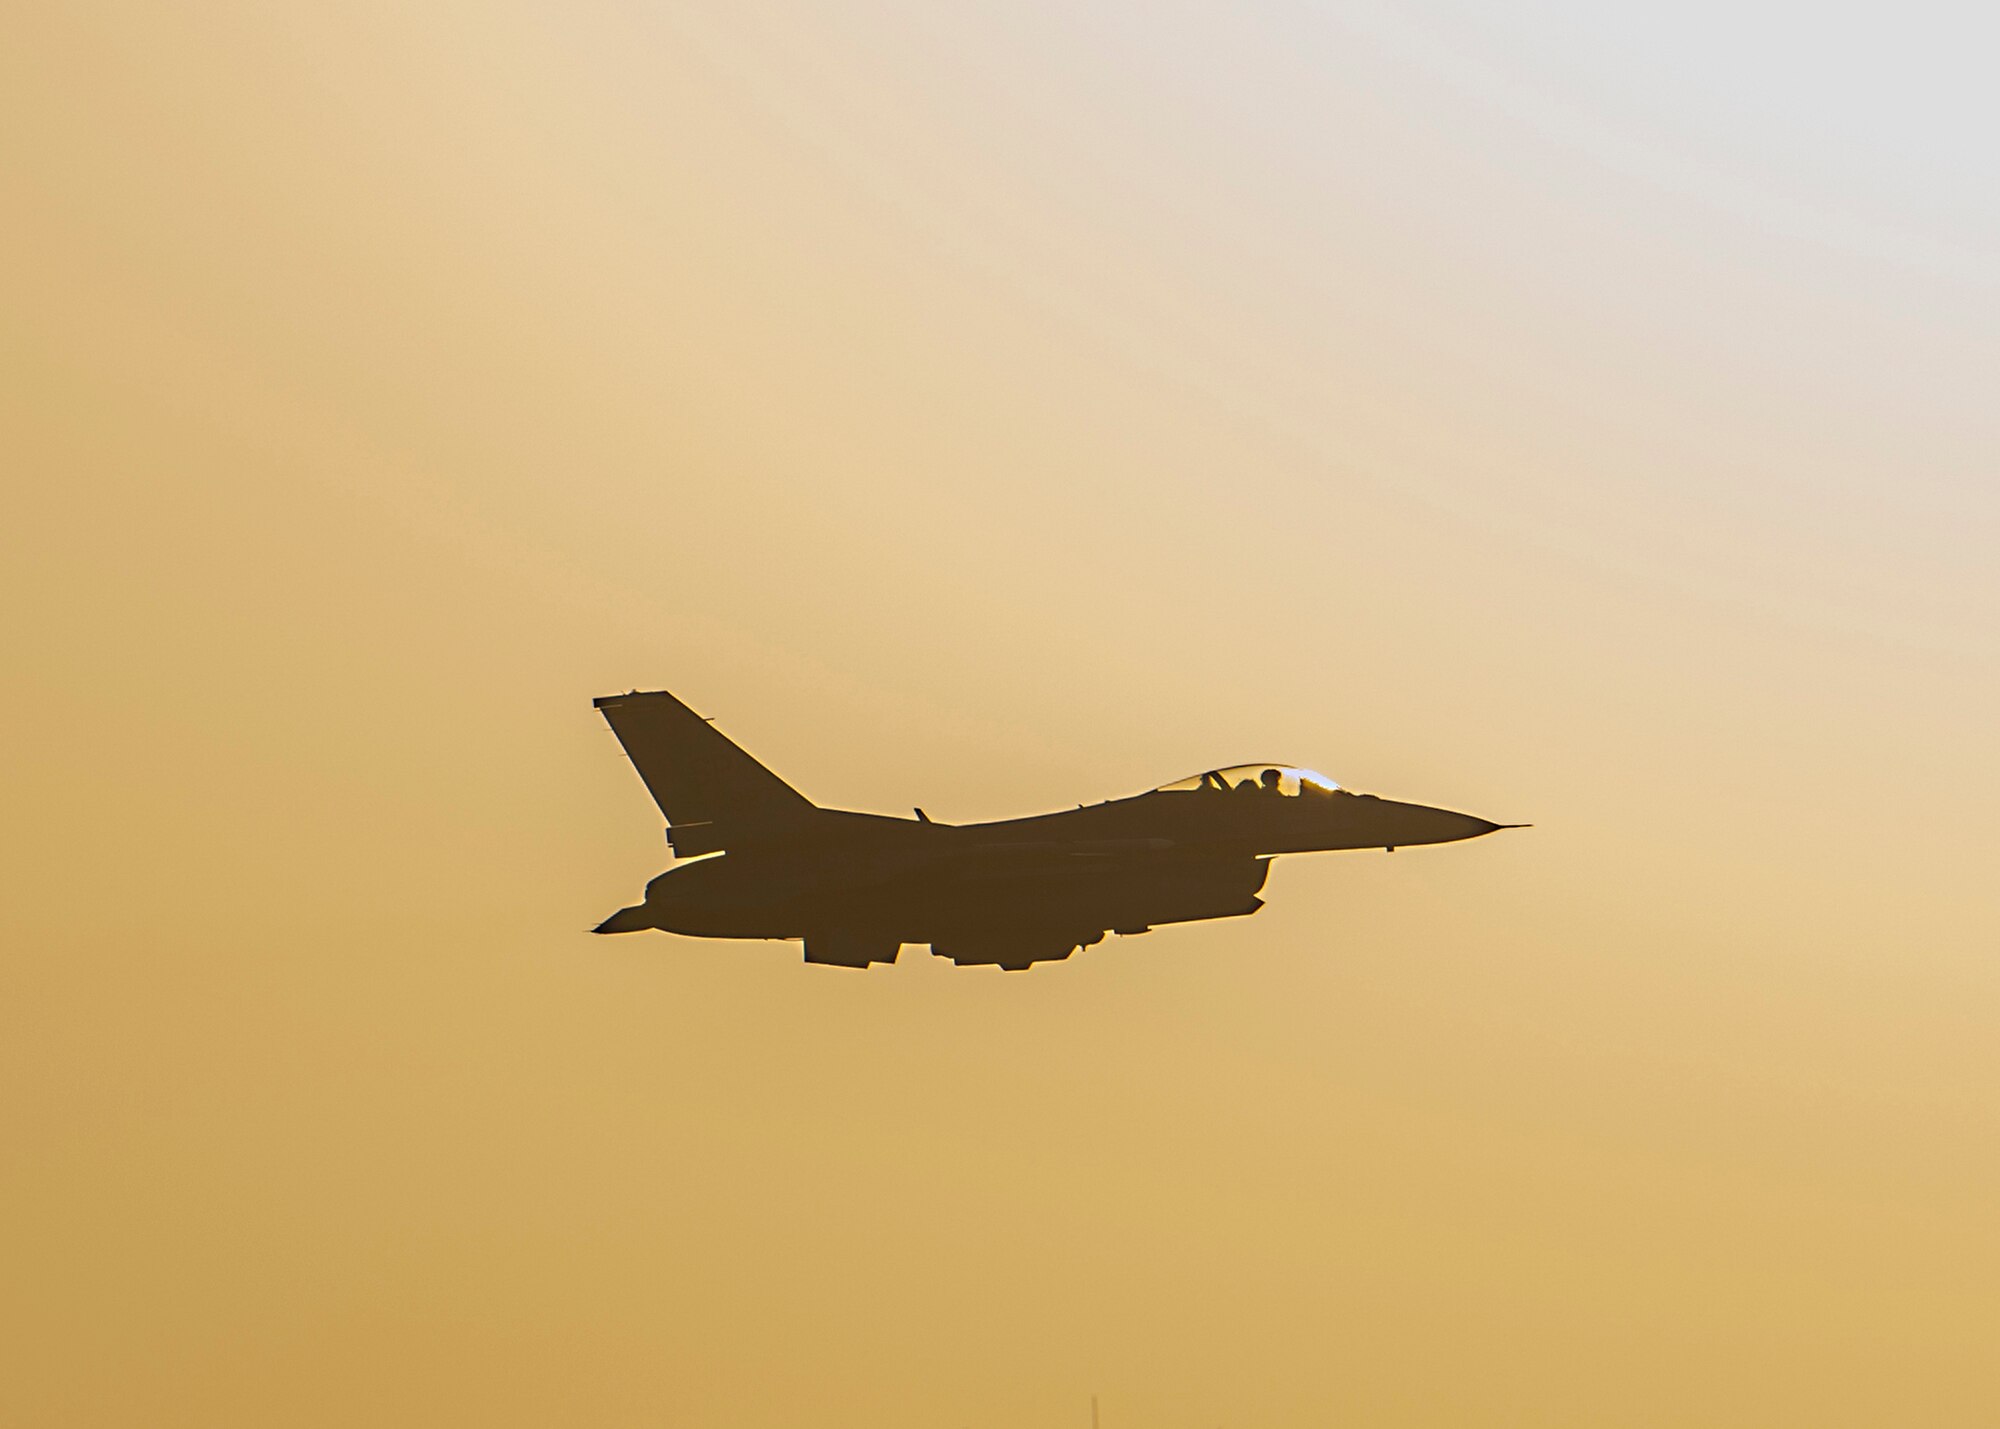 A U.S. Air Force F-16 Fighting Falcon assigned to the 480th Expeditionary Fighter Squadron flies over Al Dhafra Air Base, United Arab Emirates, Dec. 2, 2020. Deploying as an instrument of Dynamic Force Employment, a detachment of F-16s along with squadron personnel from Spangdahlem Air Base, Germany, rapidly integrated into theater air training, as well as joint, coalition and partnered missions. (U.S. Air Force photo by Senior Airman Bryan Guthrie)